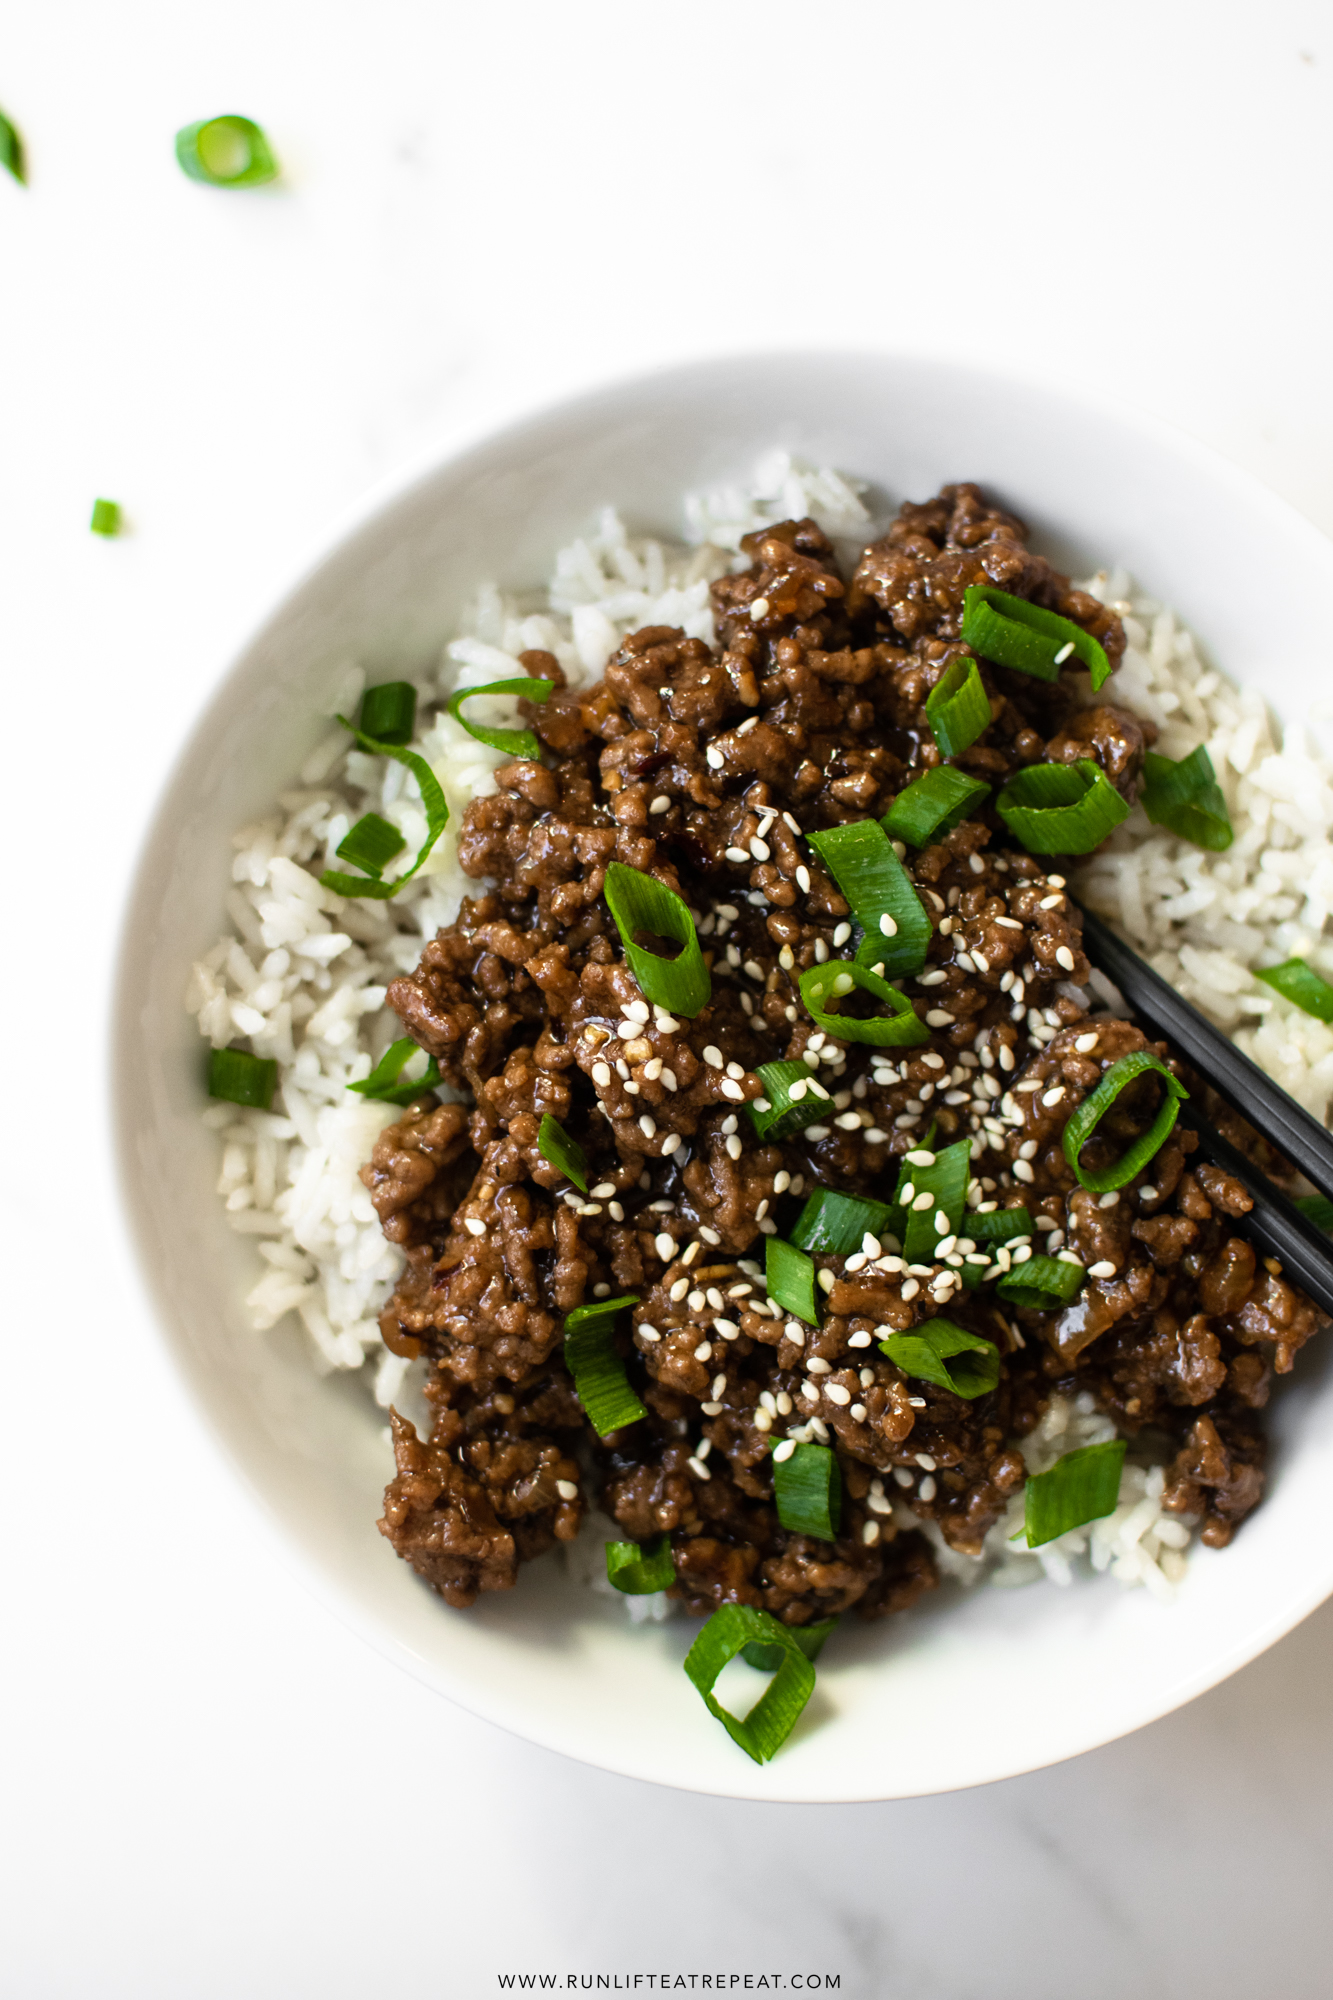 A quick and easy dinner that delivers! This Korean beef recipe, a dish made from pantry ingredients and done in under 25 minutes. Serve over white rice, garnished with sesame seeds for a flavorful meal.